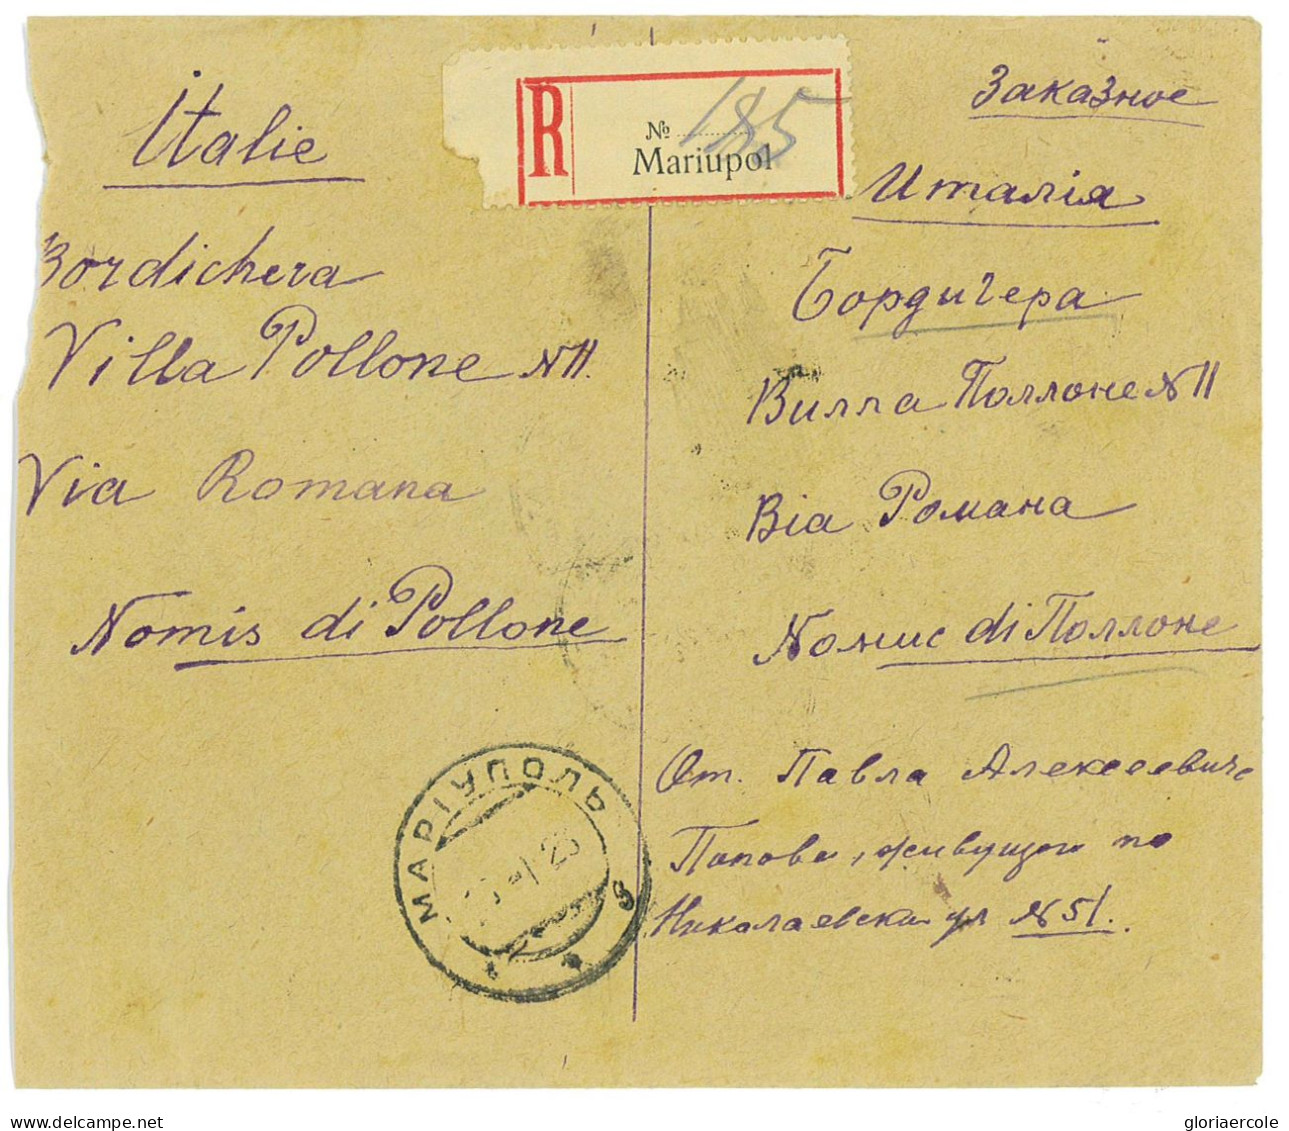 P2912 - RUSSIA , 700 RUBEL LETTER REGISTERED FROM MARIUPOL 1923 TO ITALY - Lettres & Documents